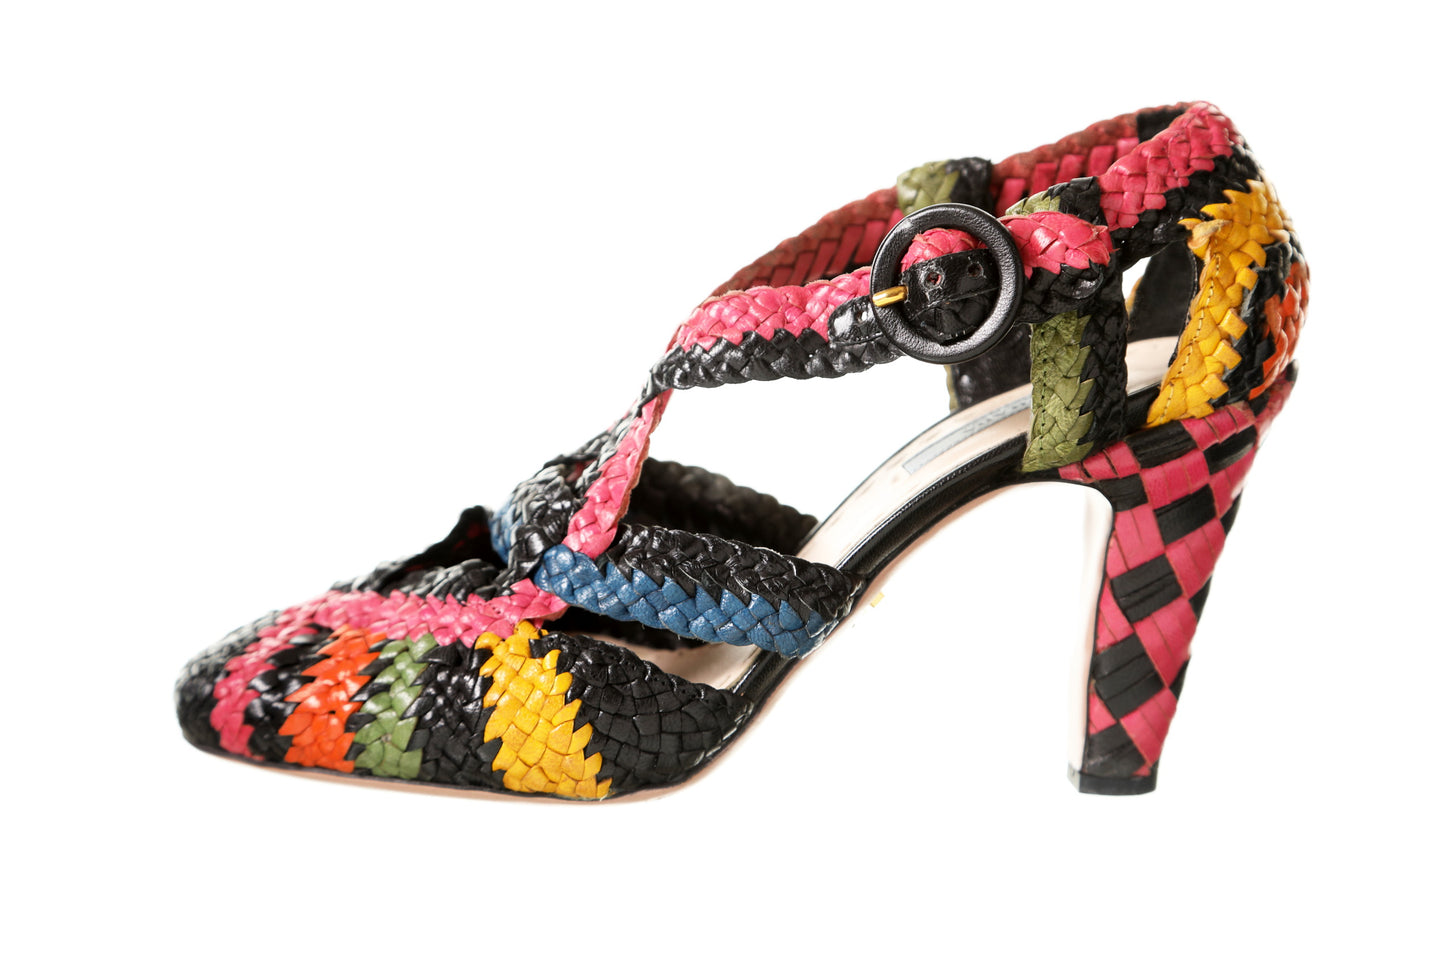 Prada Mary Jane pumps from the Spring 2011 runway collection